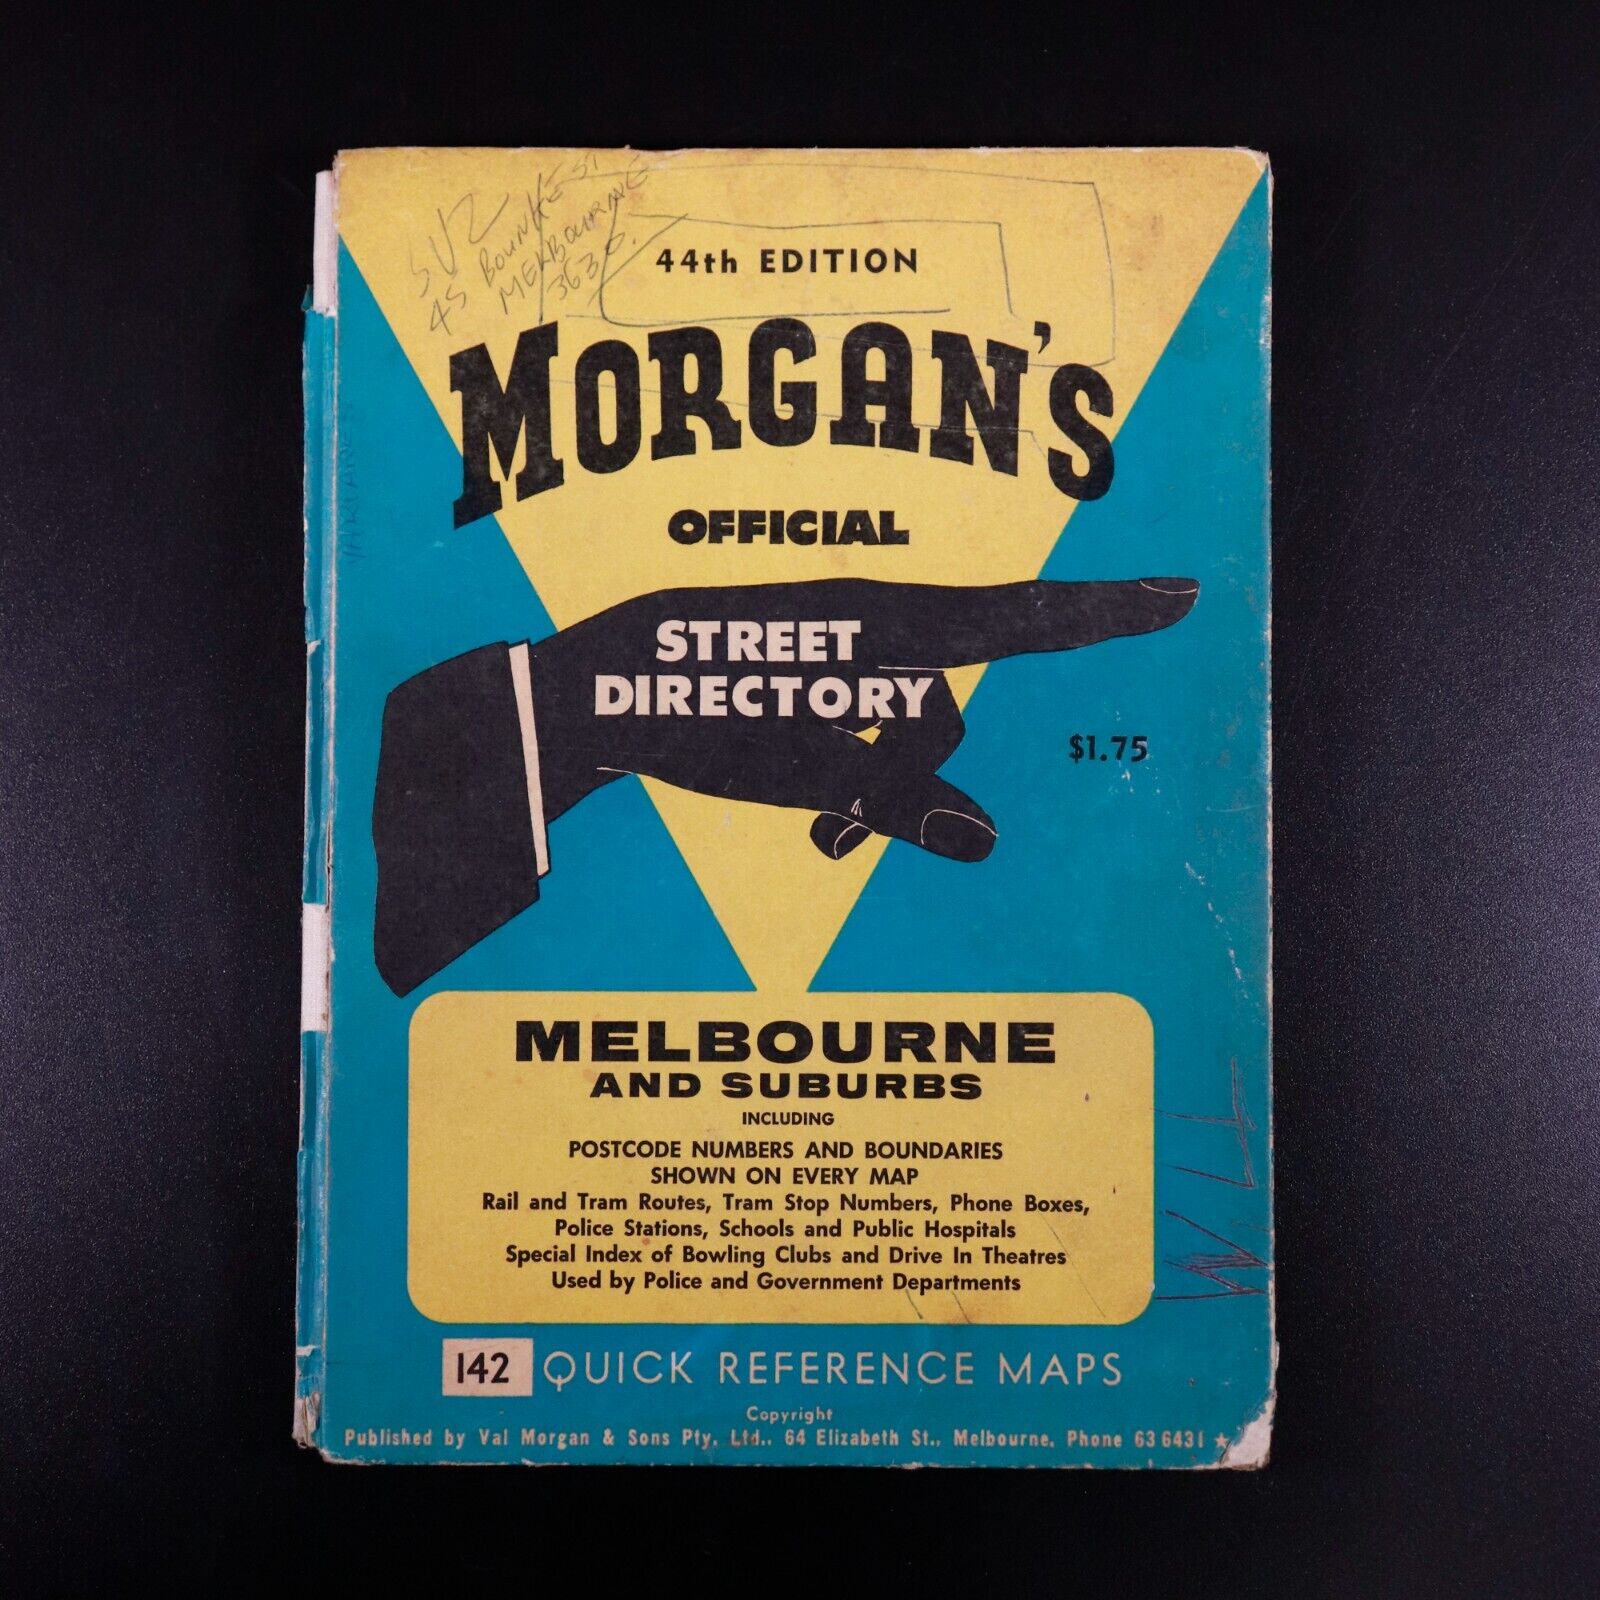 c1961 Morgan's Official Street Directory - Melbourne Vintage Maps Reference Book